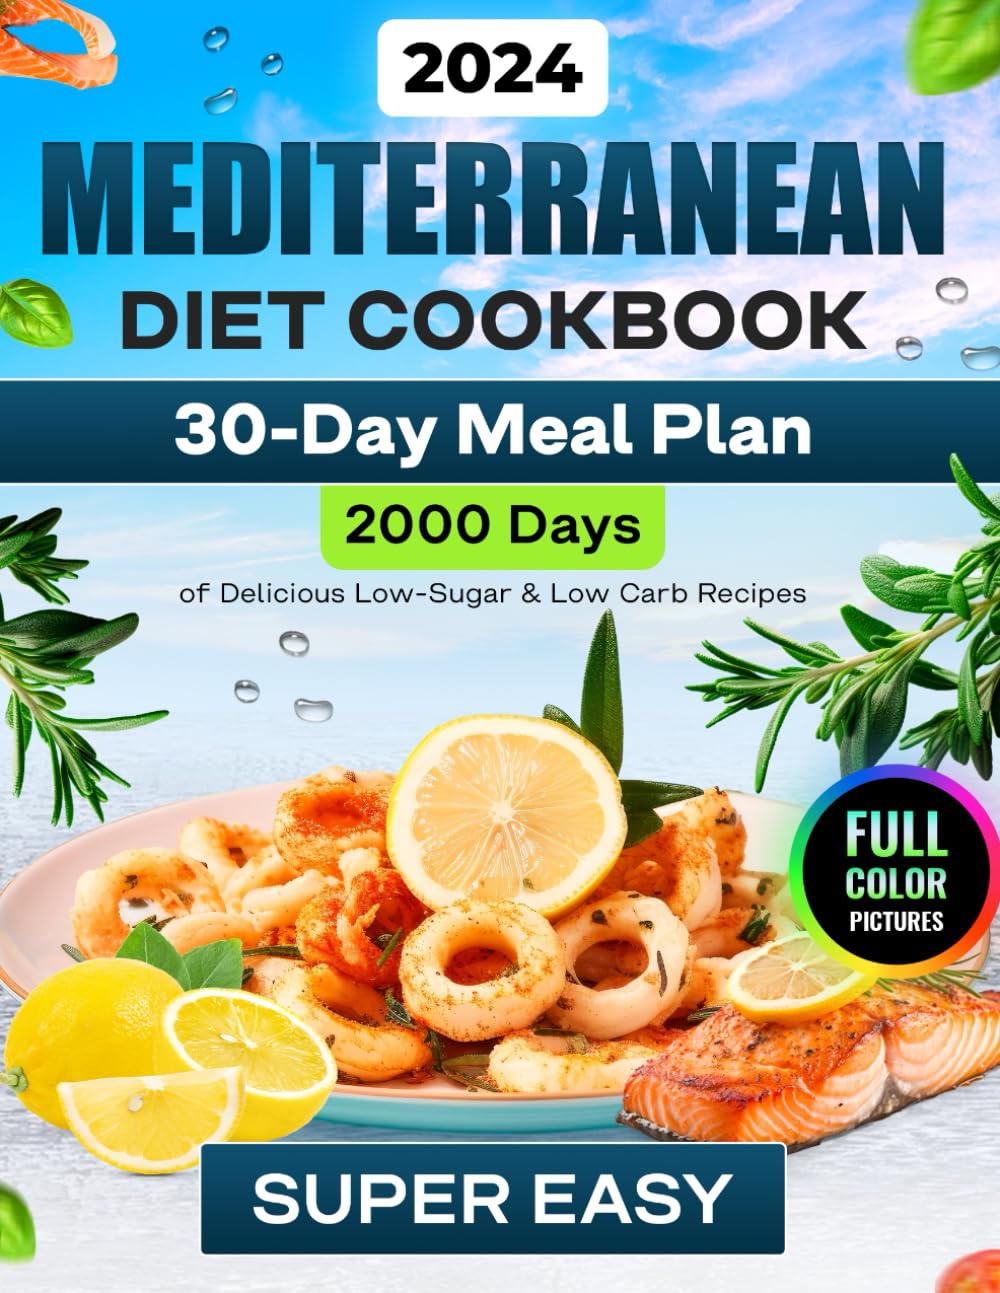 Mediterranean Diet Cookbook (Full-Color Photos): 2000 Days of Super Delicious, Quick & Easy Mediterranean Diet Recipes for Beginners with a 30-Day ... for Beginners 2023-2024 with Color Pictures)